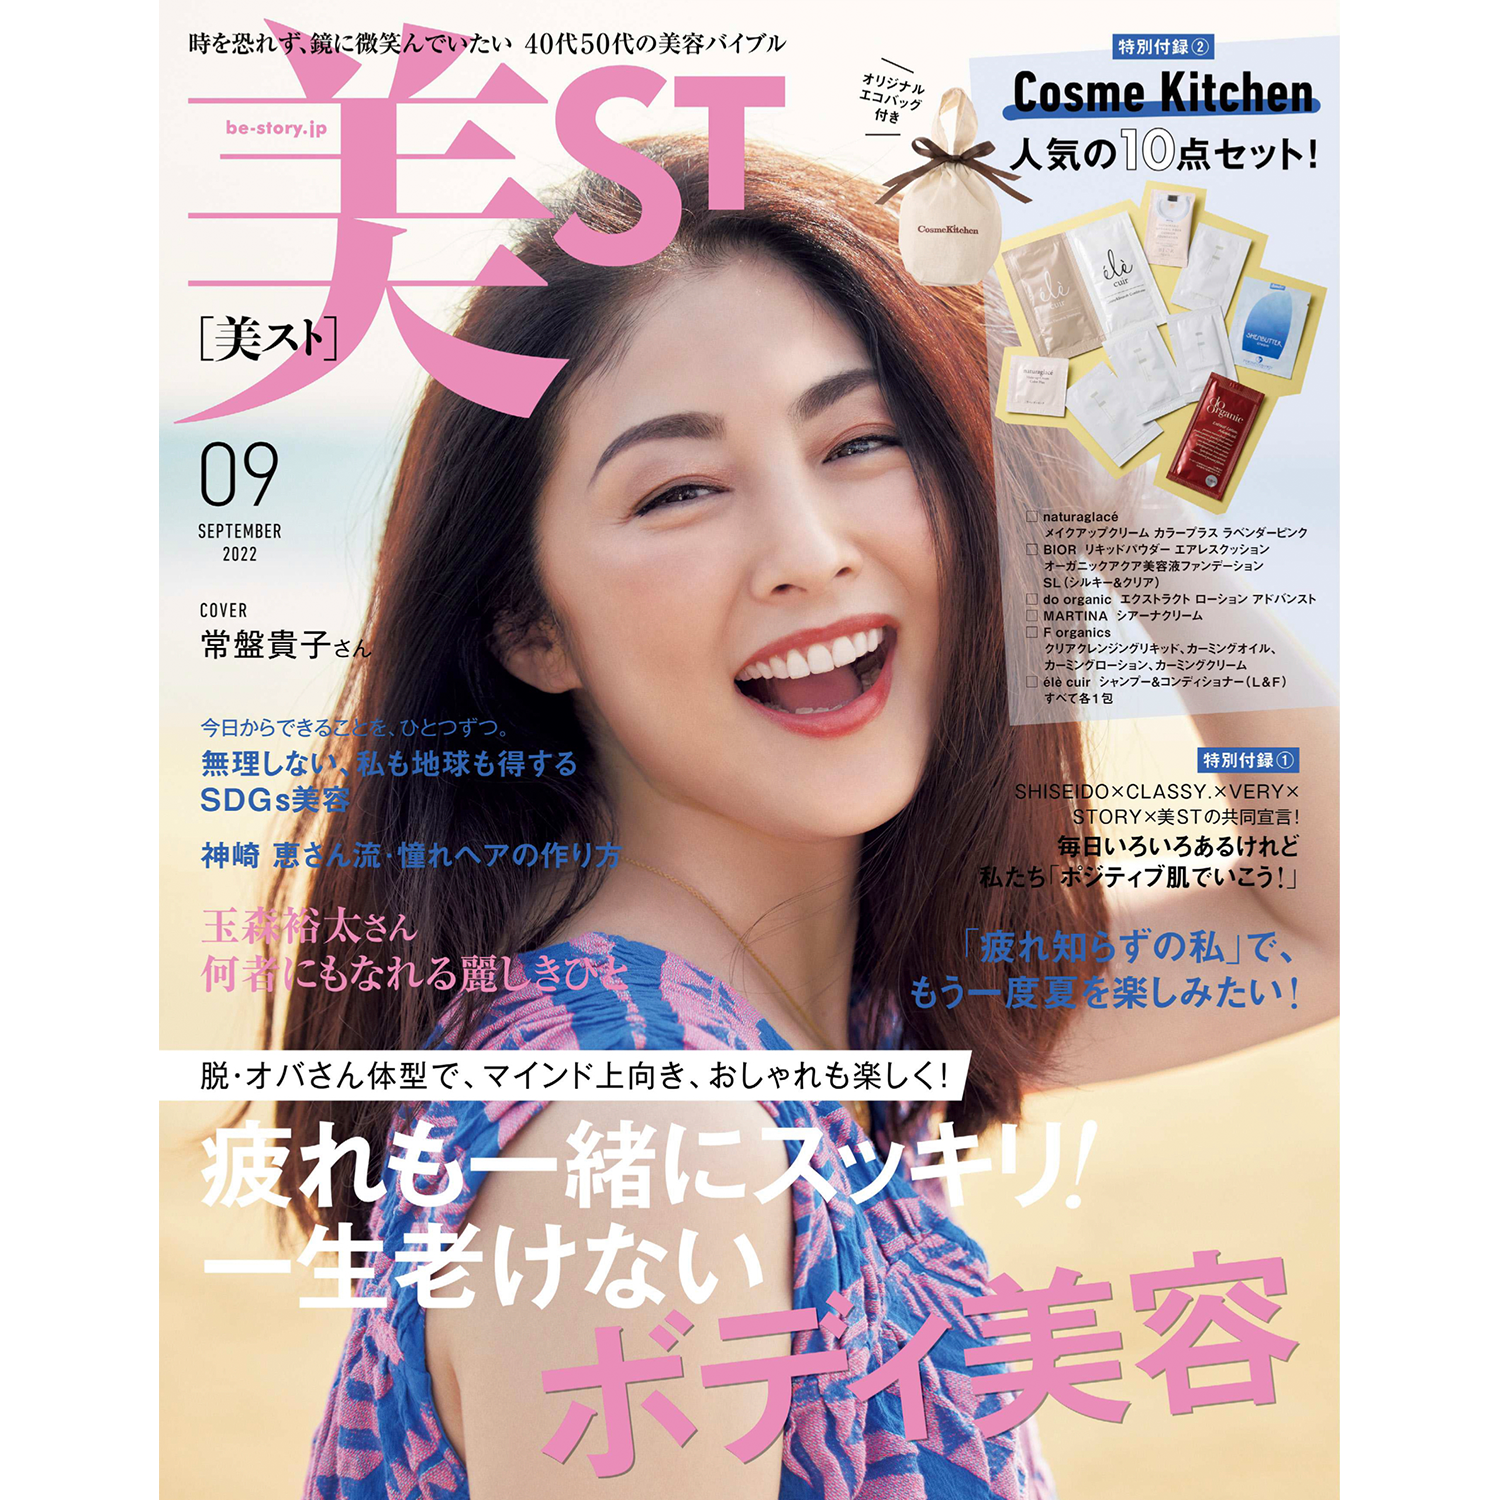 bist_2022_09_cover